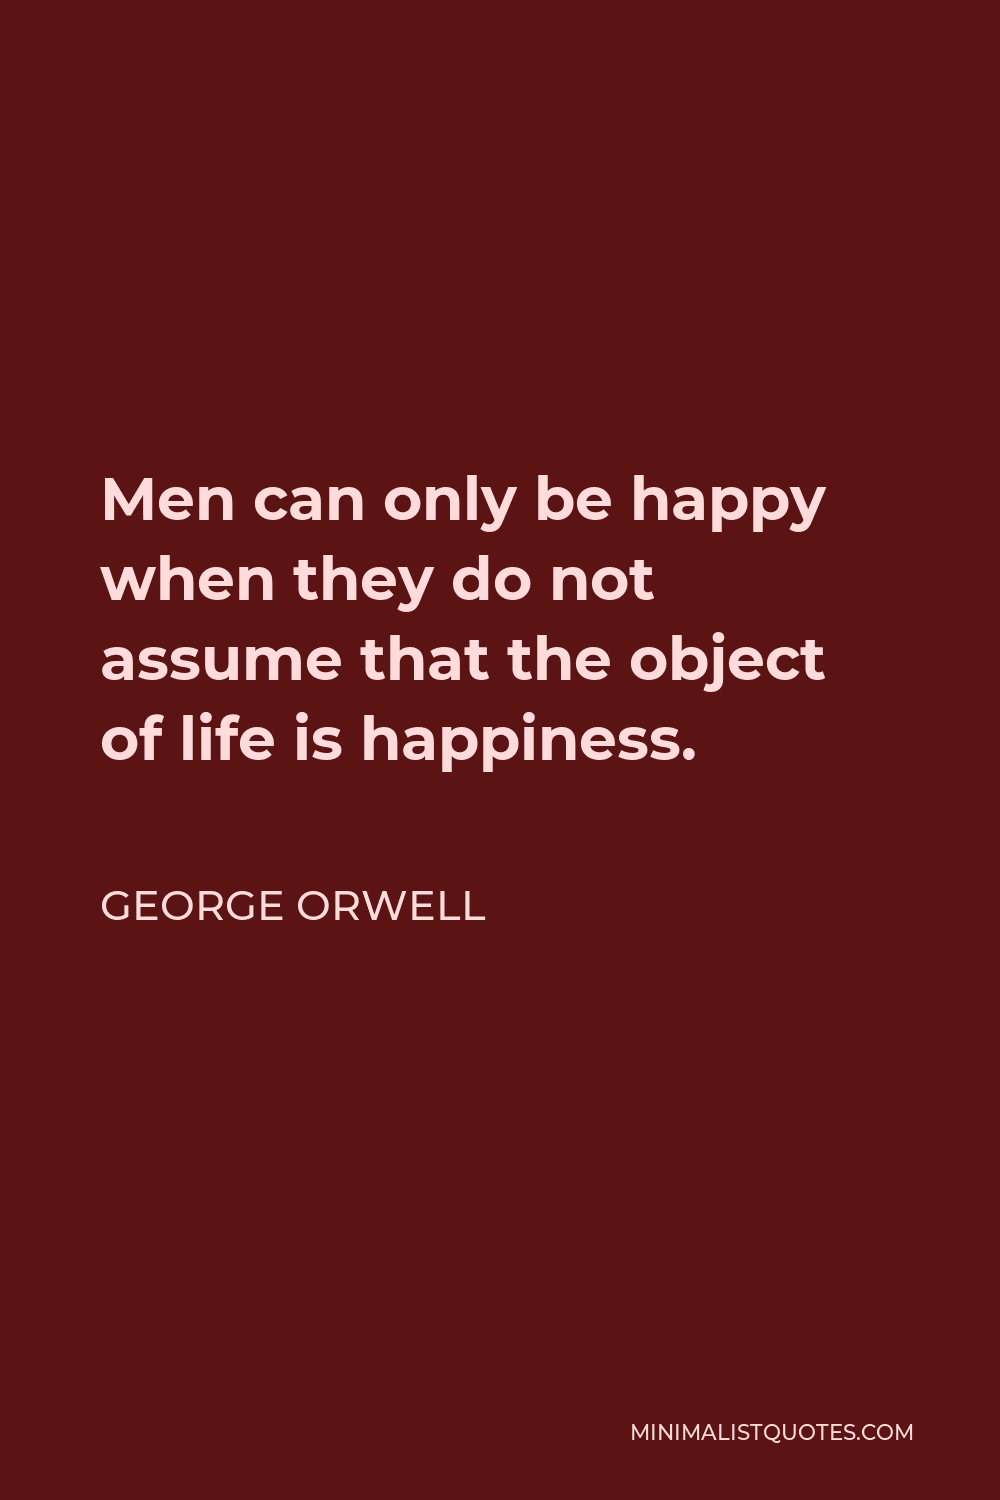 George Orwell Quote - Men can only be happy when they do not assume that the object of life is happiness.